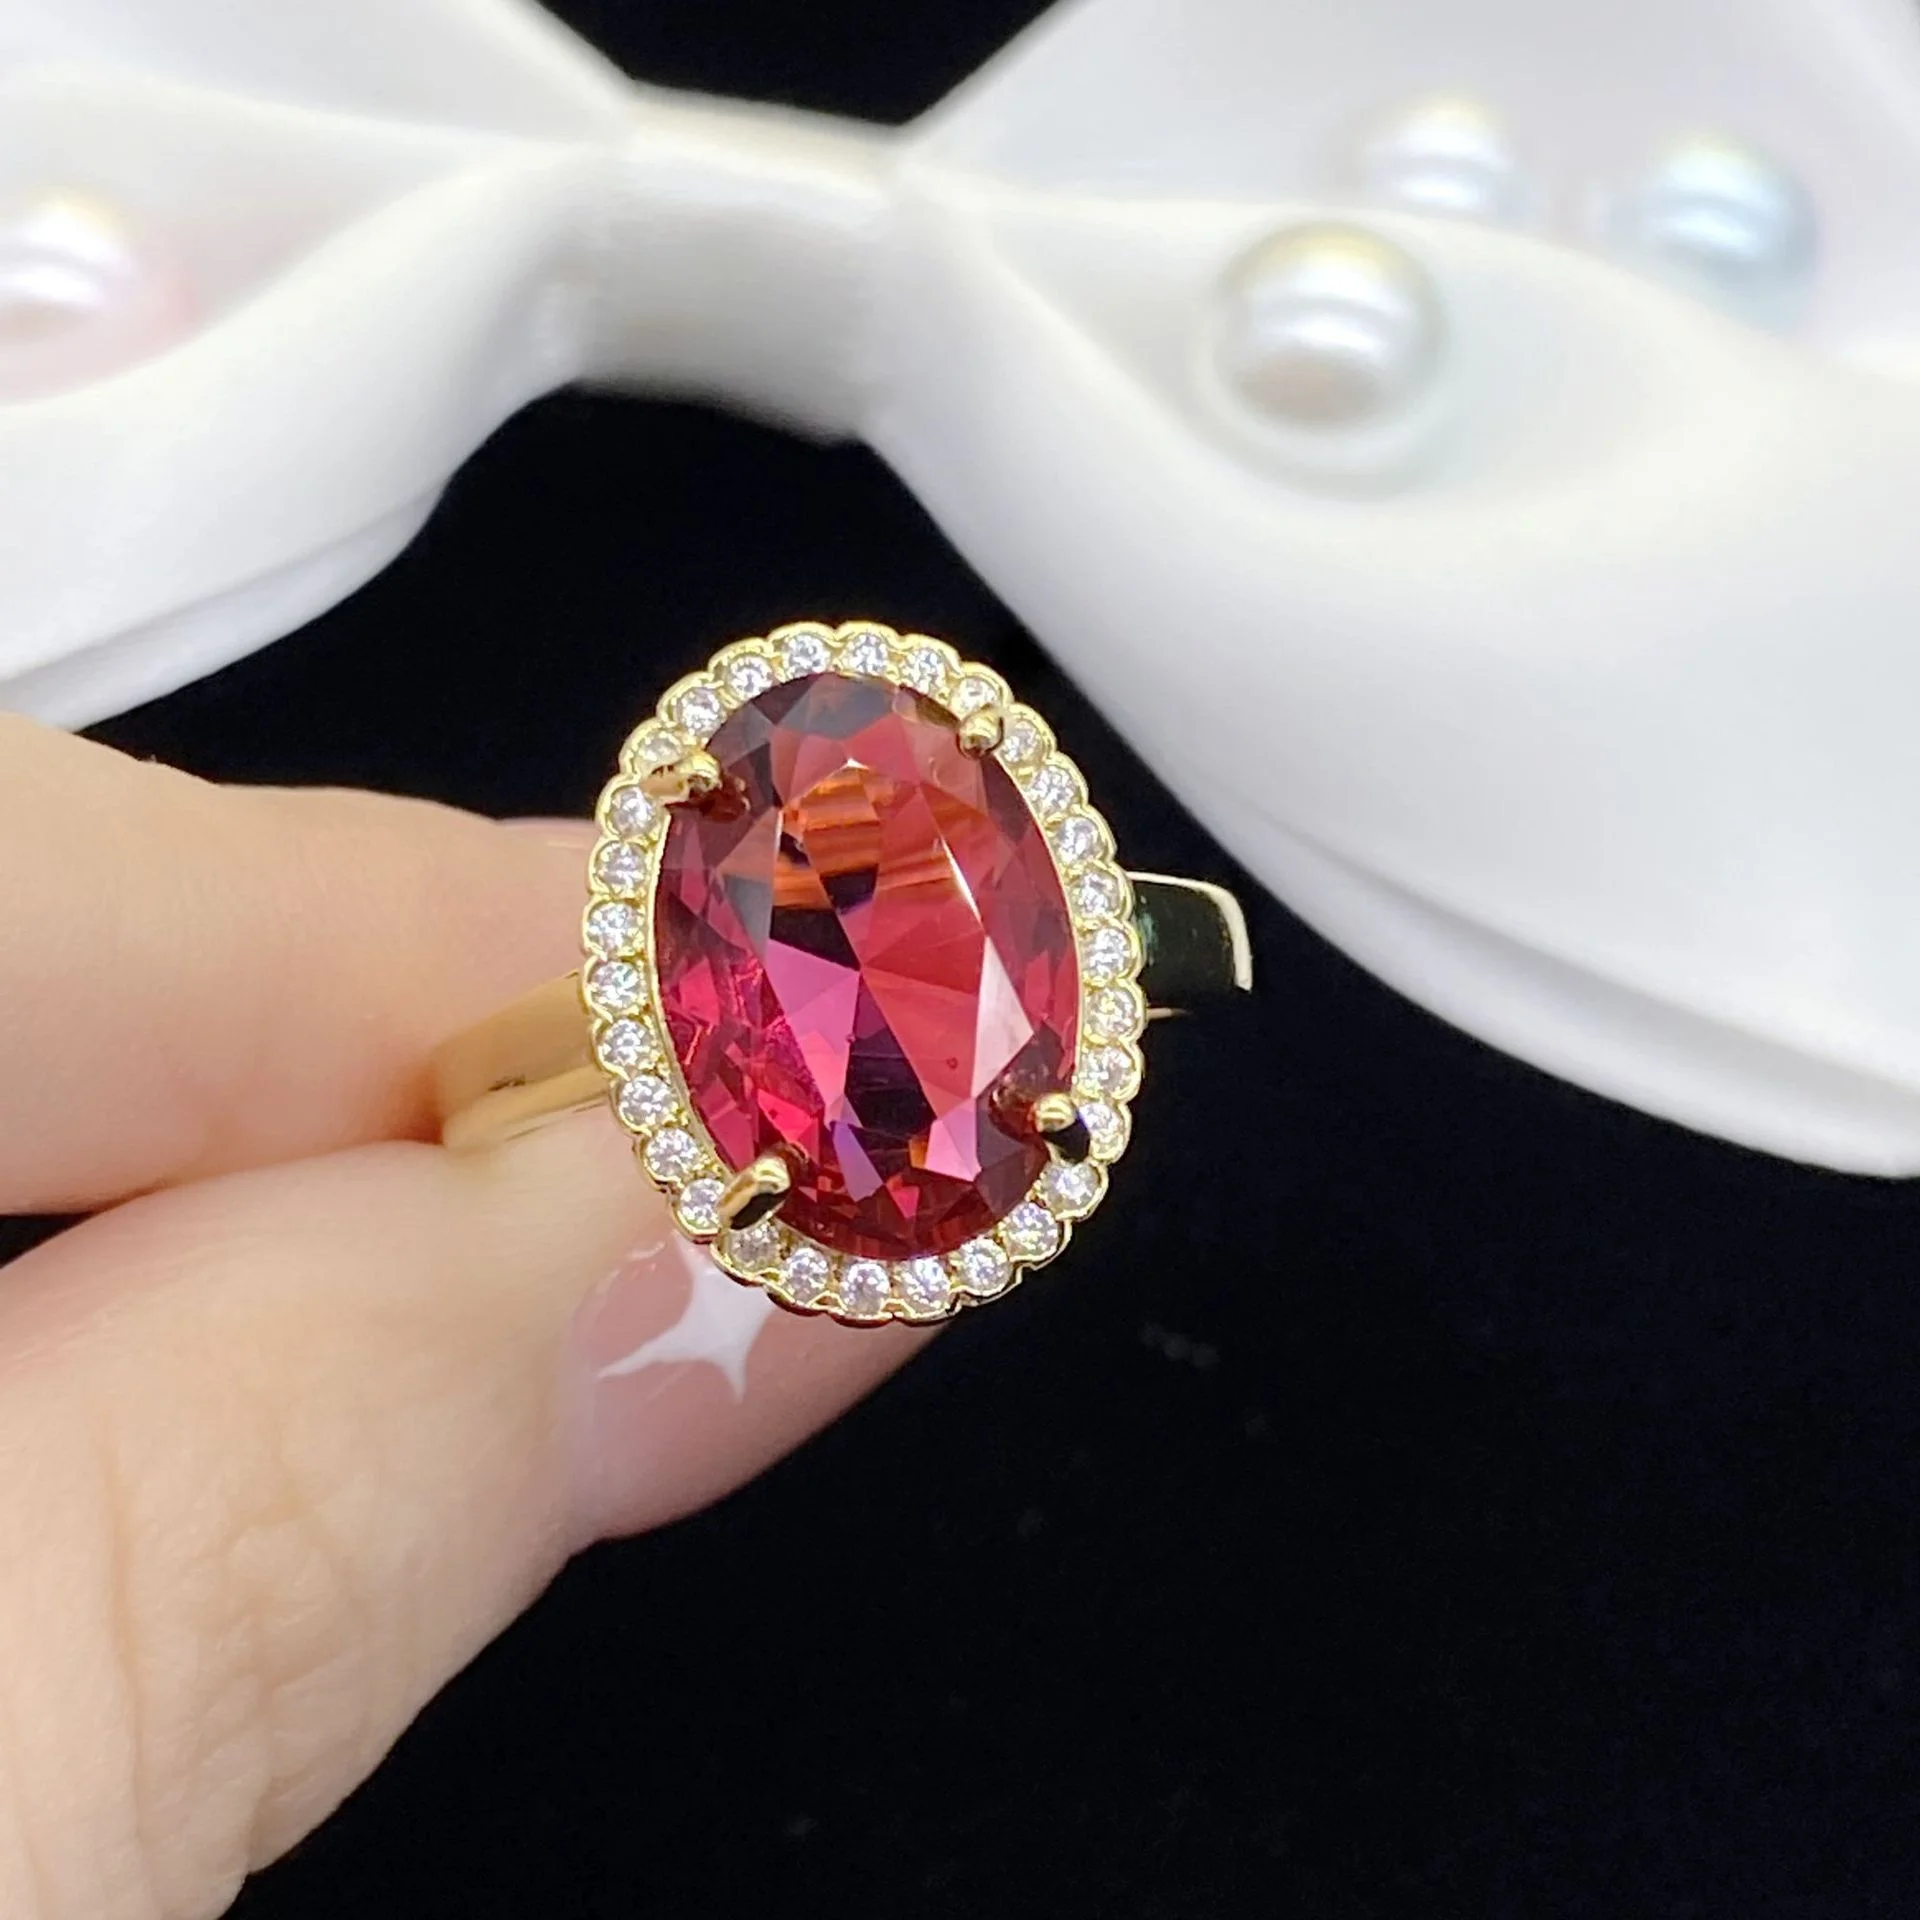 

Vintage Jewelry Bijou Bands Ruby zircon Rings for Women Red Austrian Crystal Rose Gold Filled Accessory, Picture shows